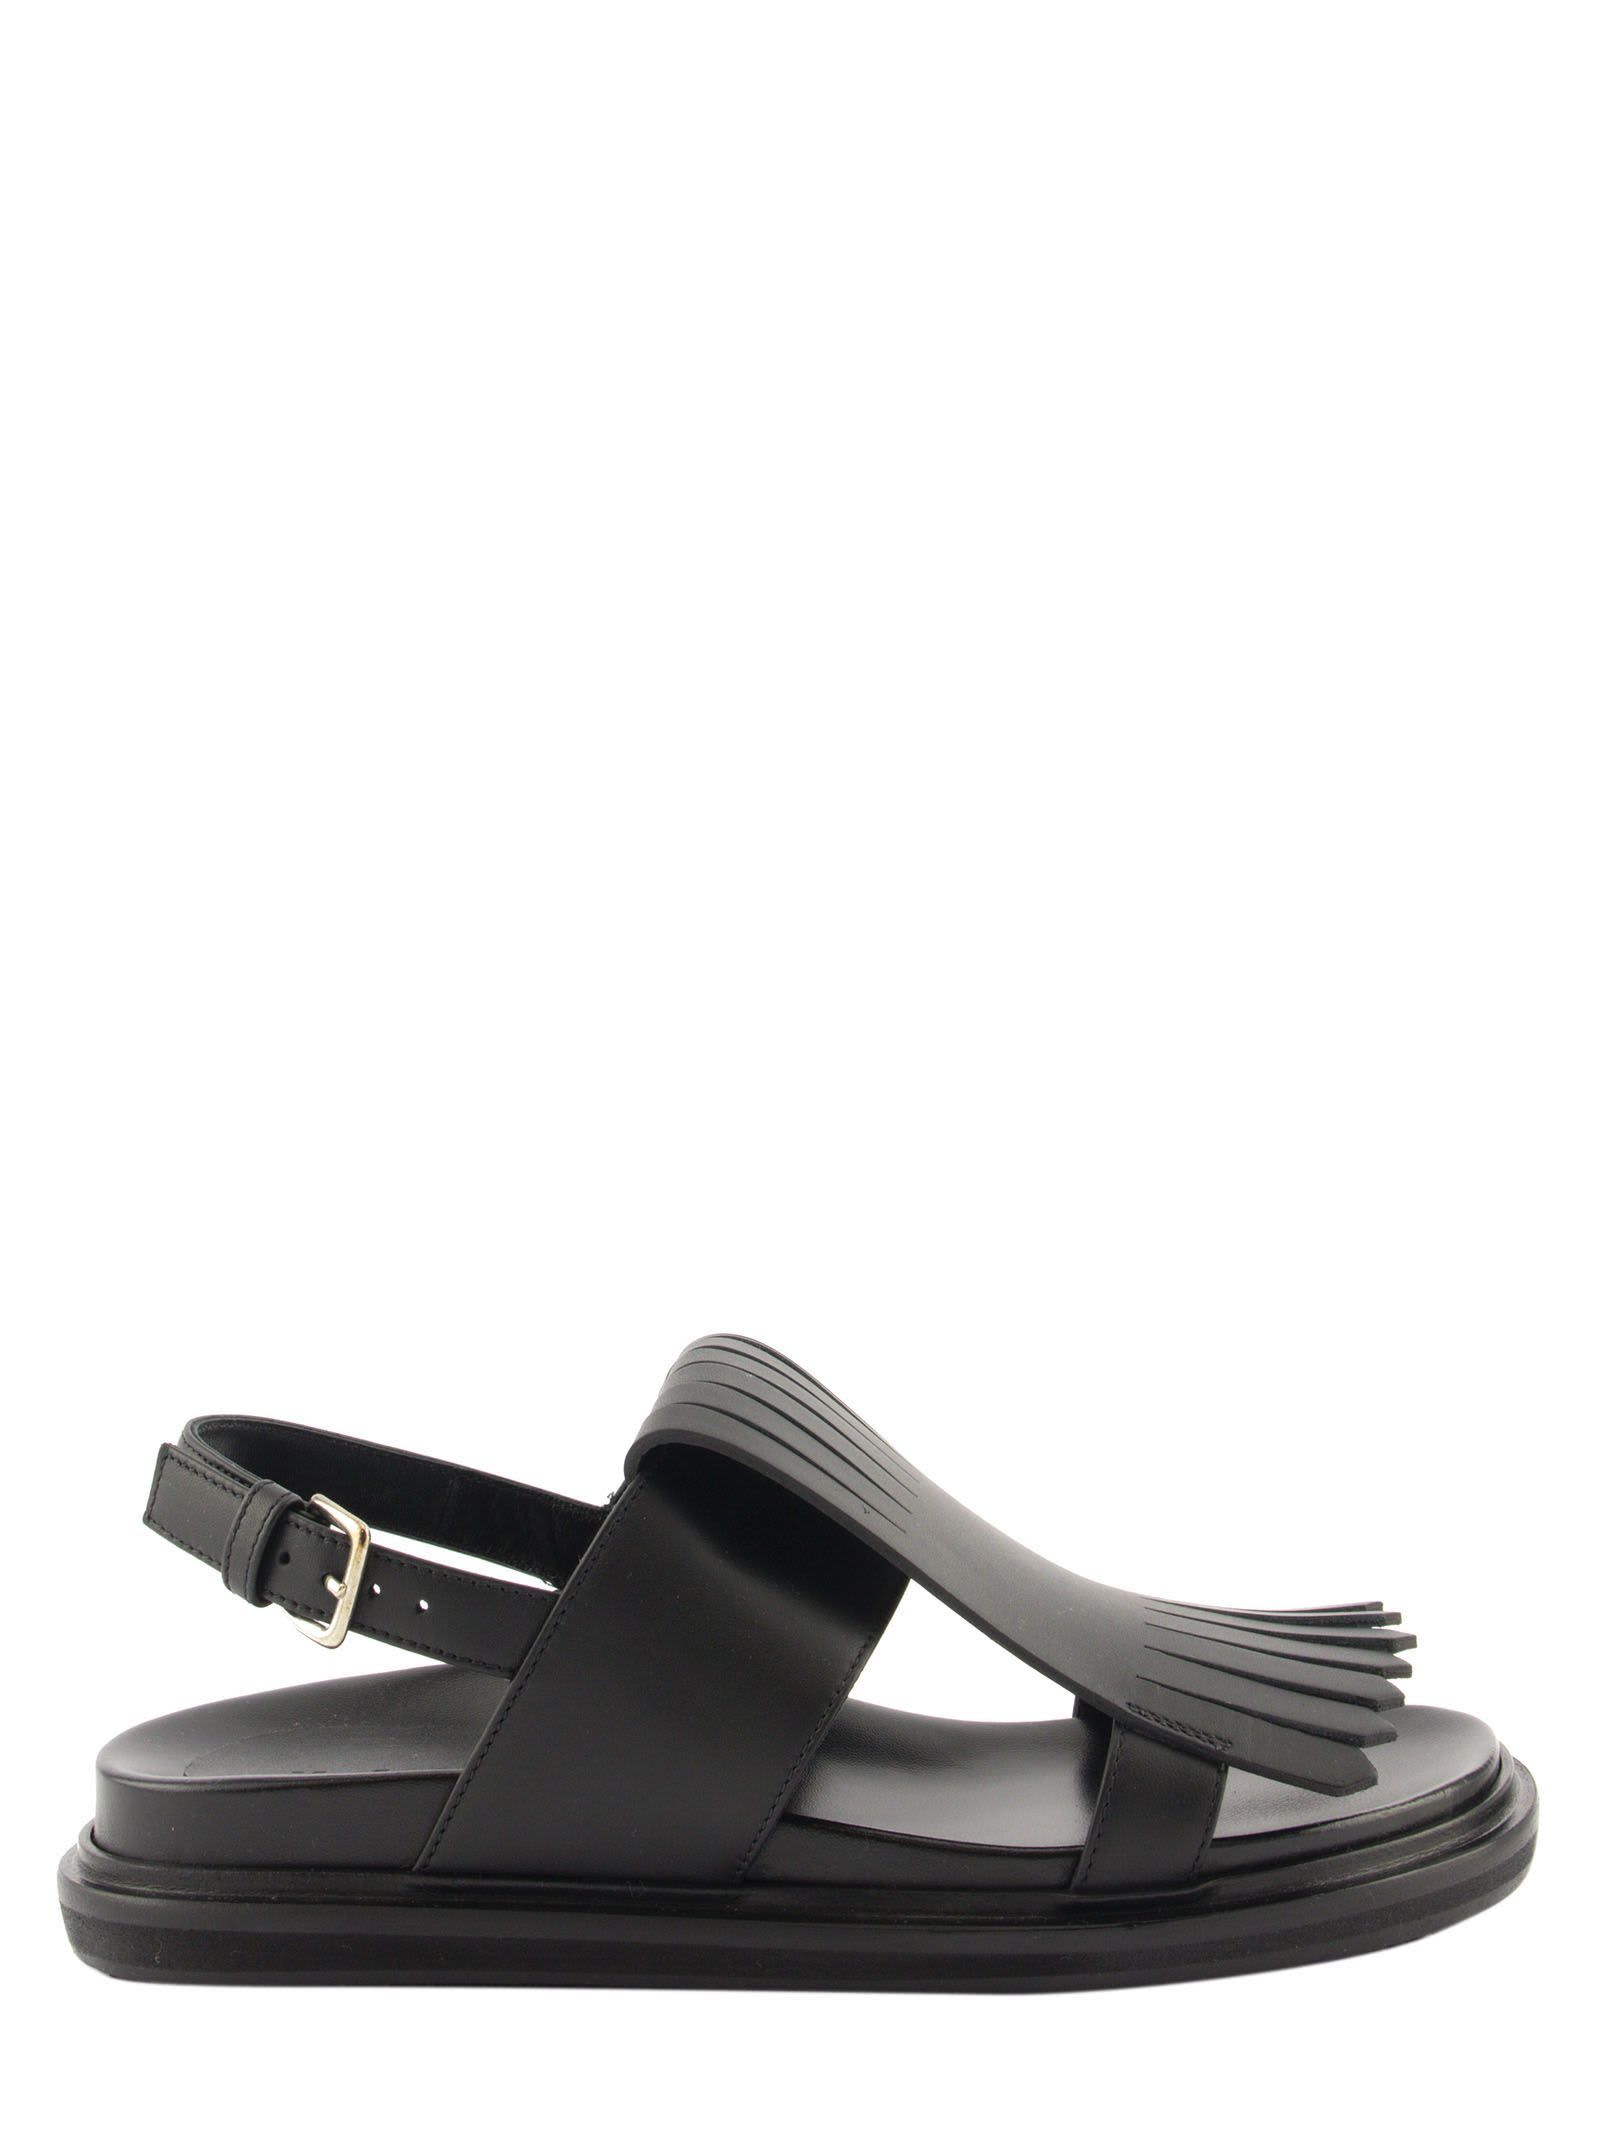 Buy Marni Fringed Fussbett In Calfskin Sandal online, shop Marni shoes with free shipping